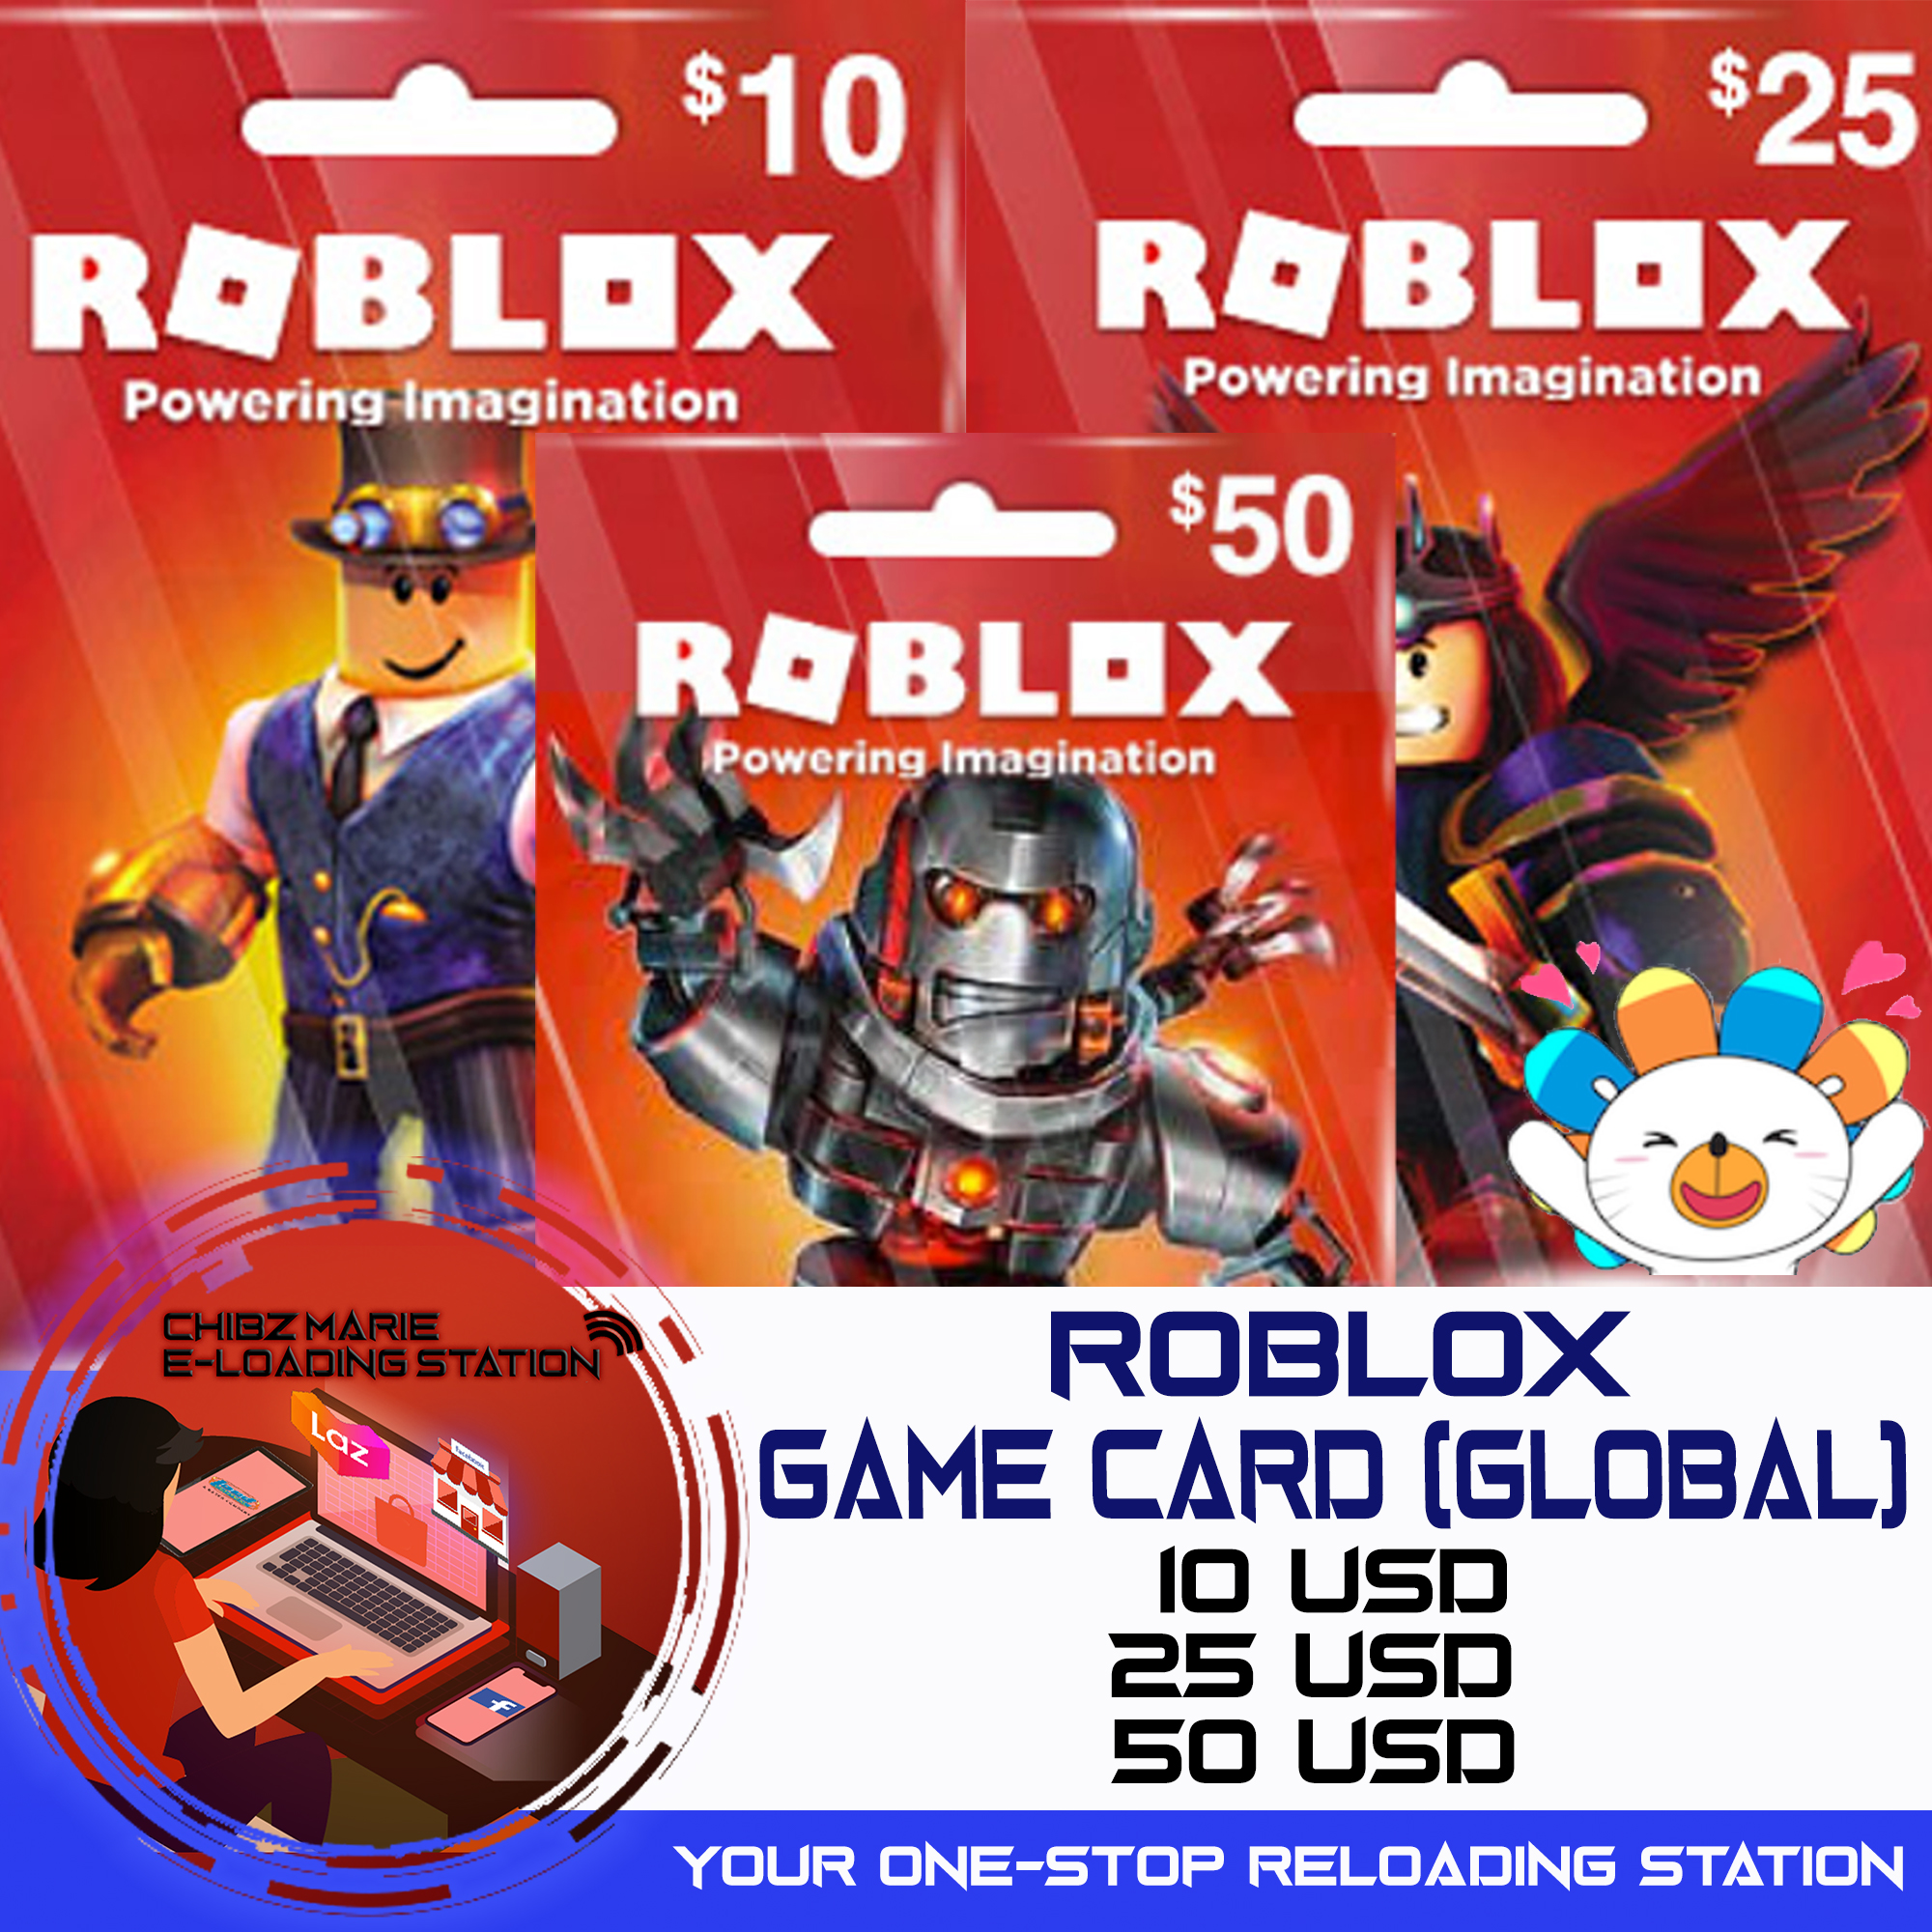 25 Robux Gift Card Shop 25 Robux Gift Card With Great Discounts And Prices Online Lazada Philippines - biggest roblox gift card 25